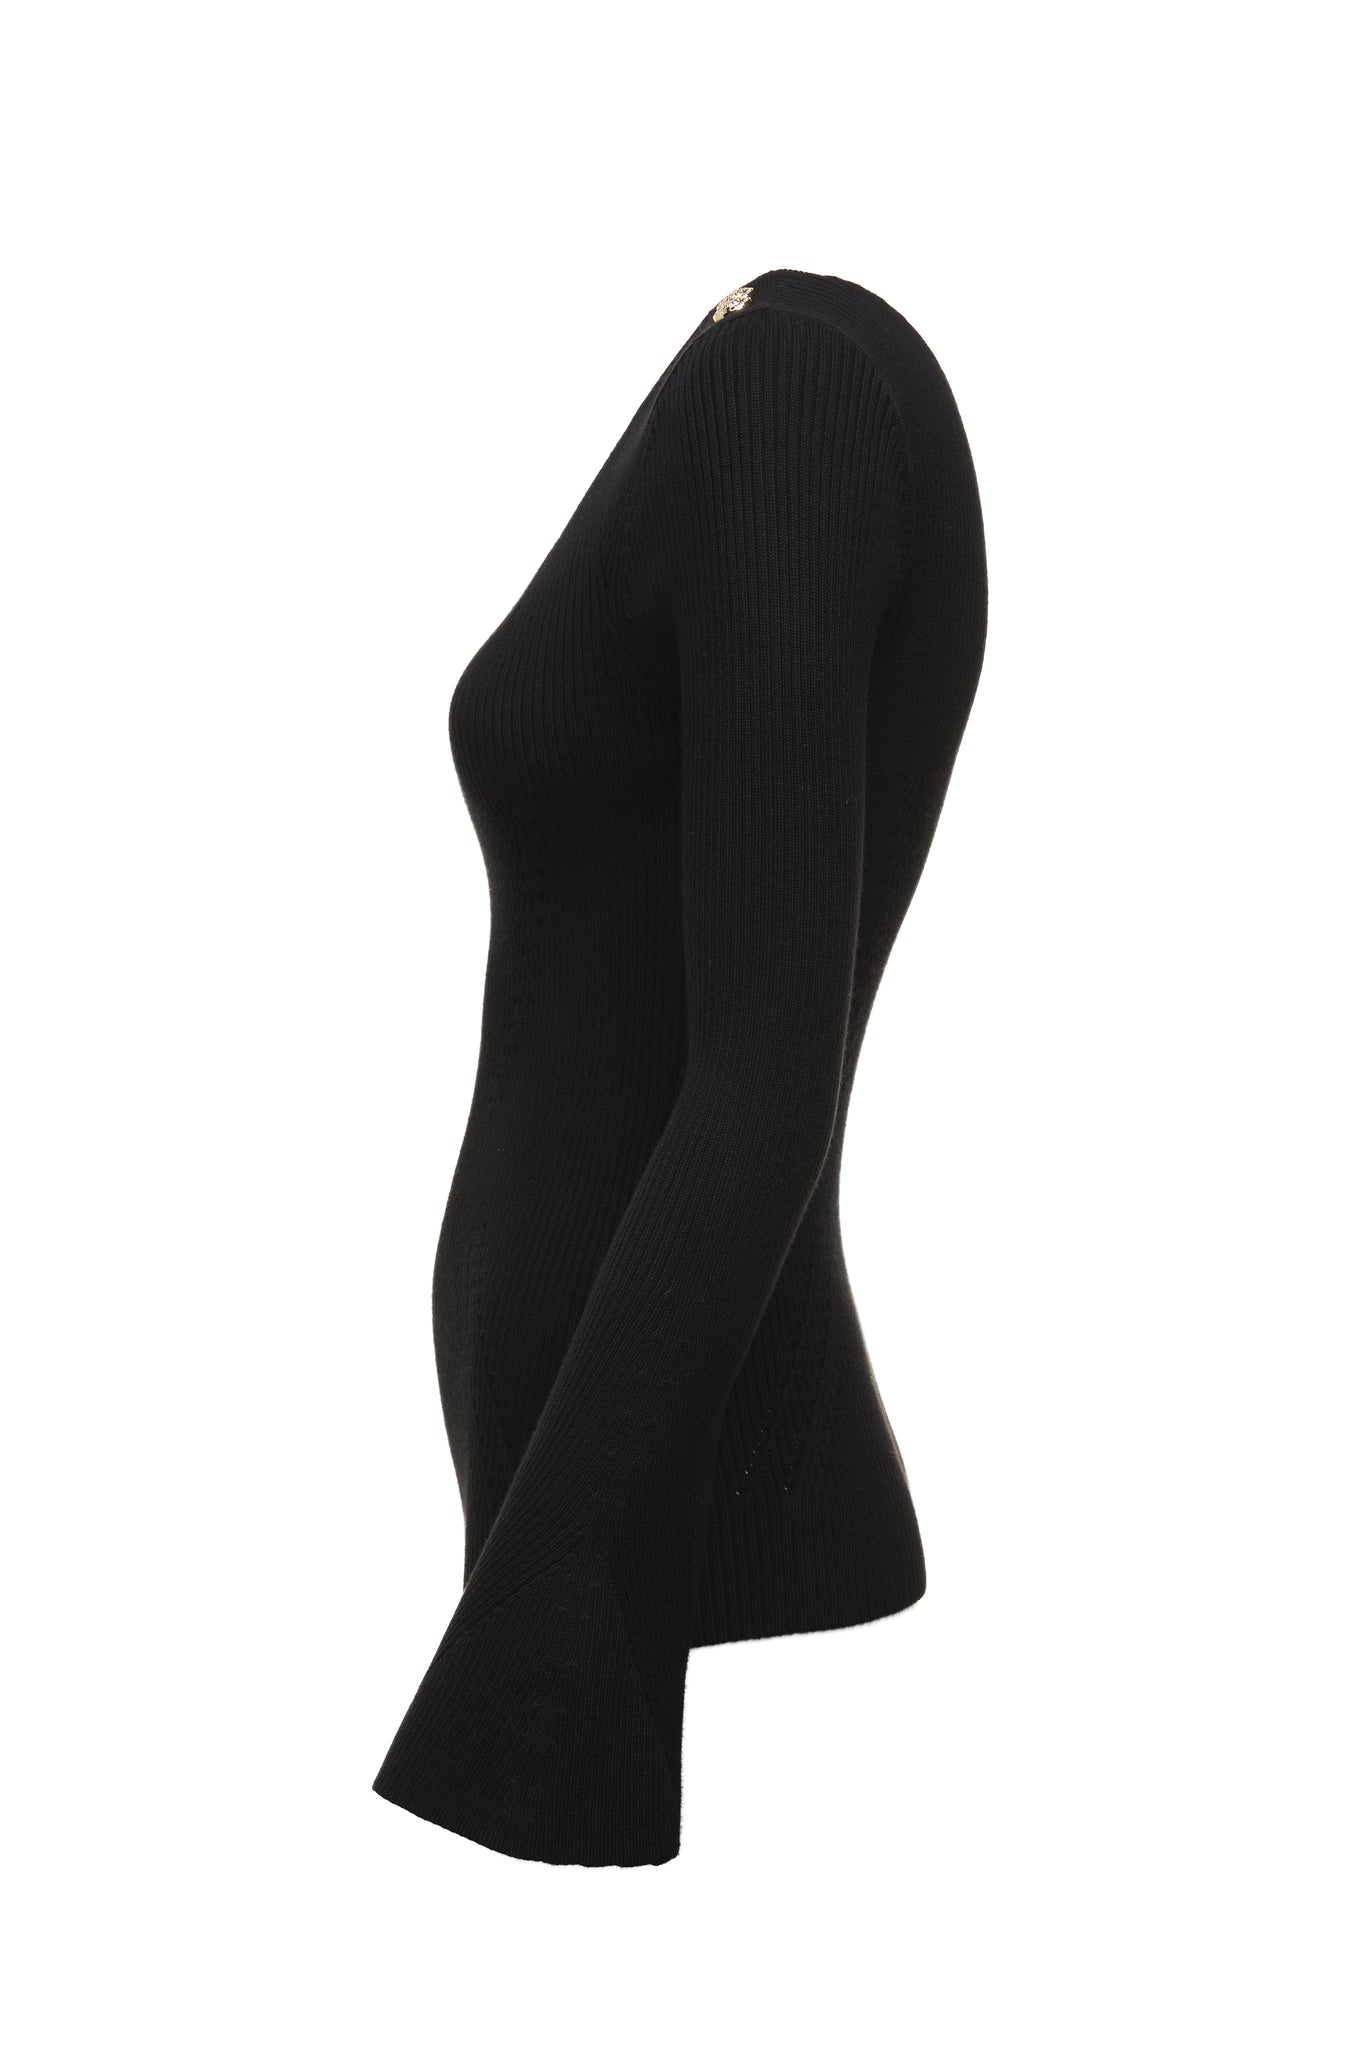 a form fitting lightweight ribbed knit black jumper with a boat neckline and bell sleeves